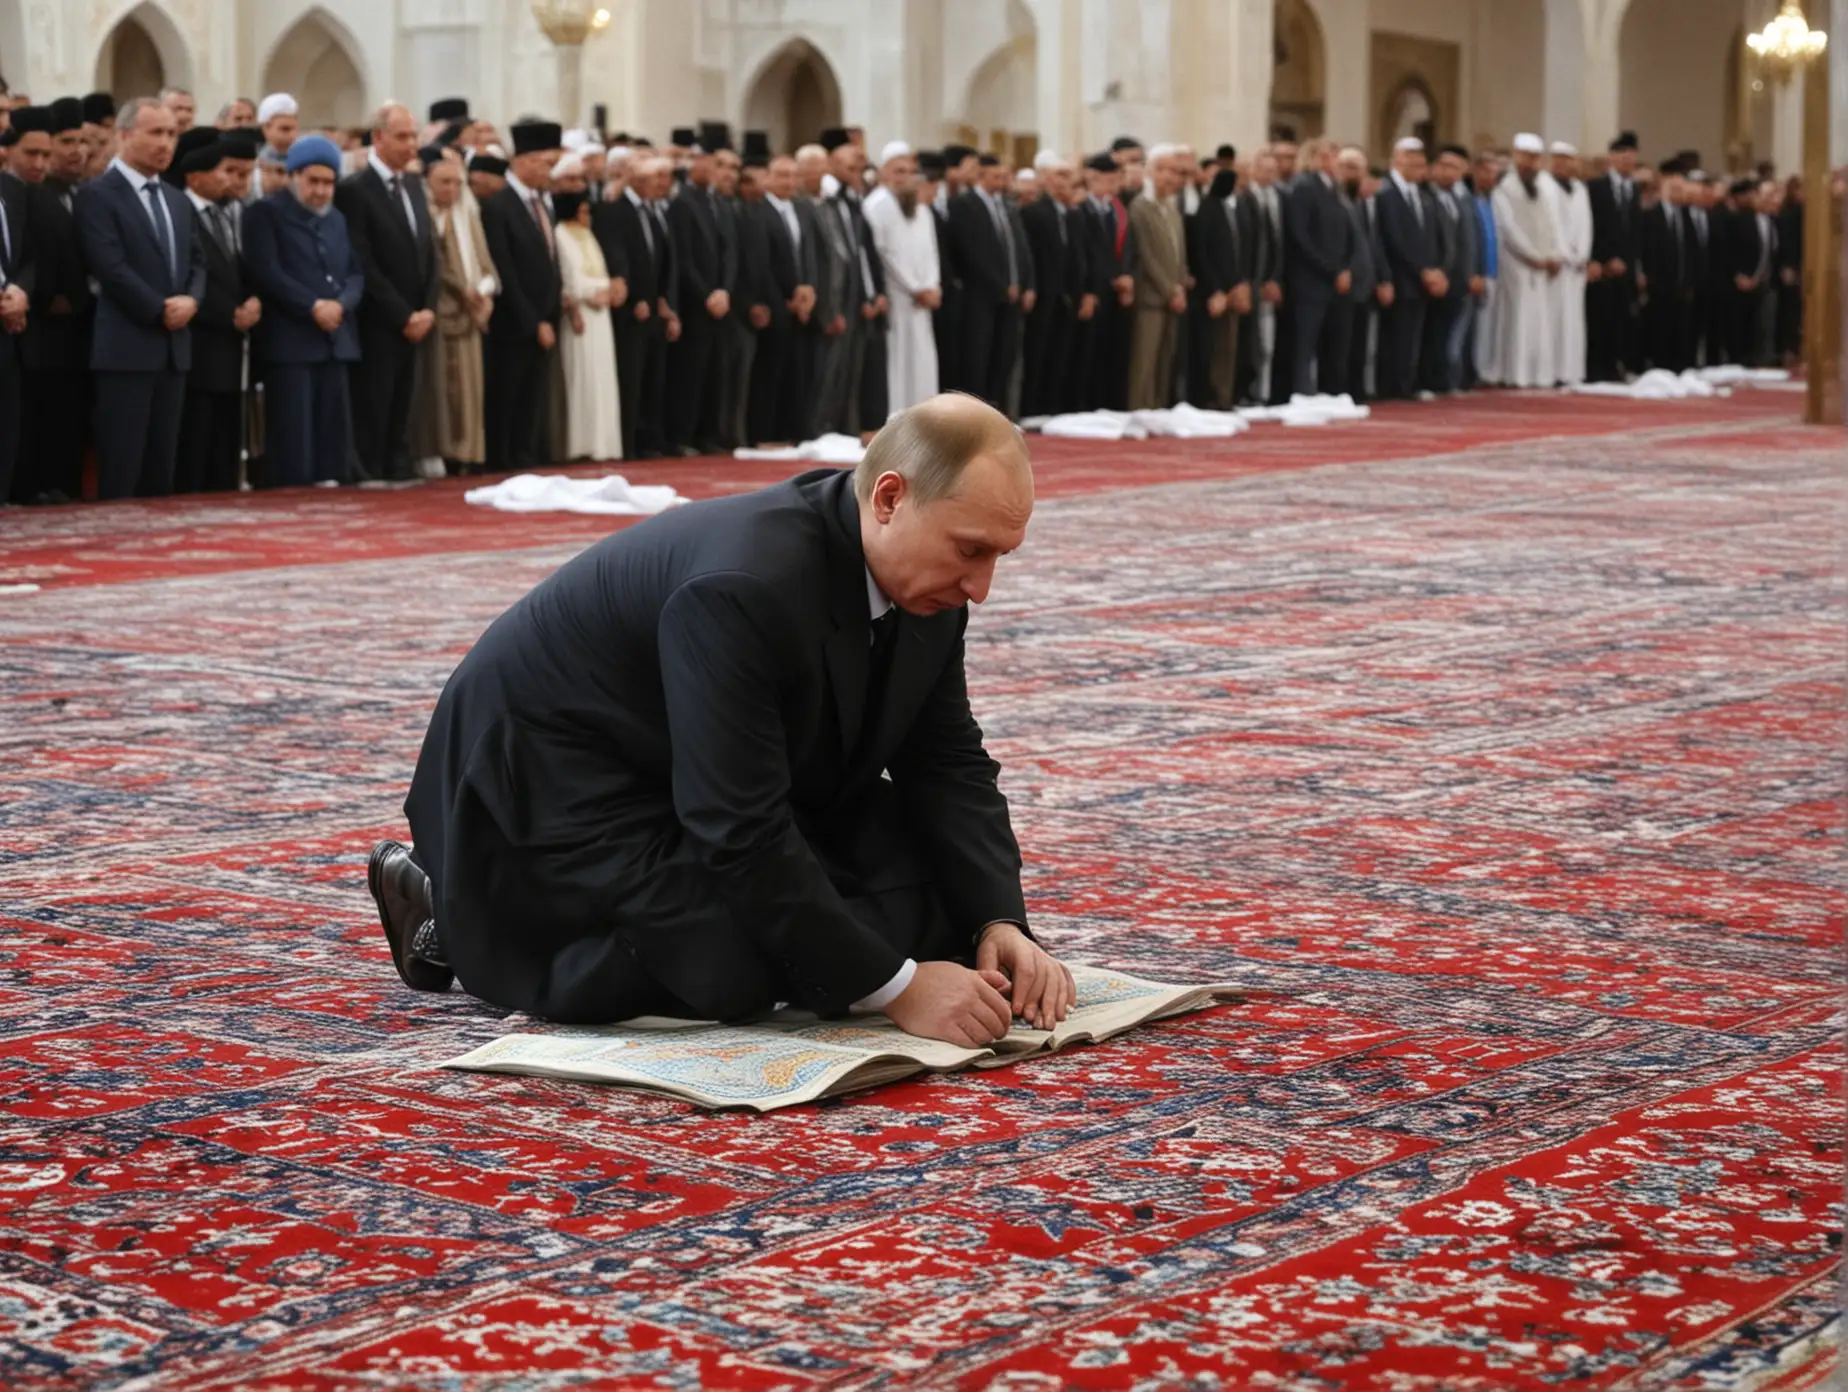 Vladimir-Putin-Praying-in-a-Mosque-with-Two-Attendees